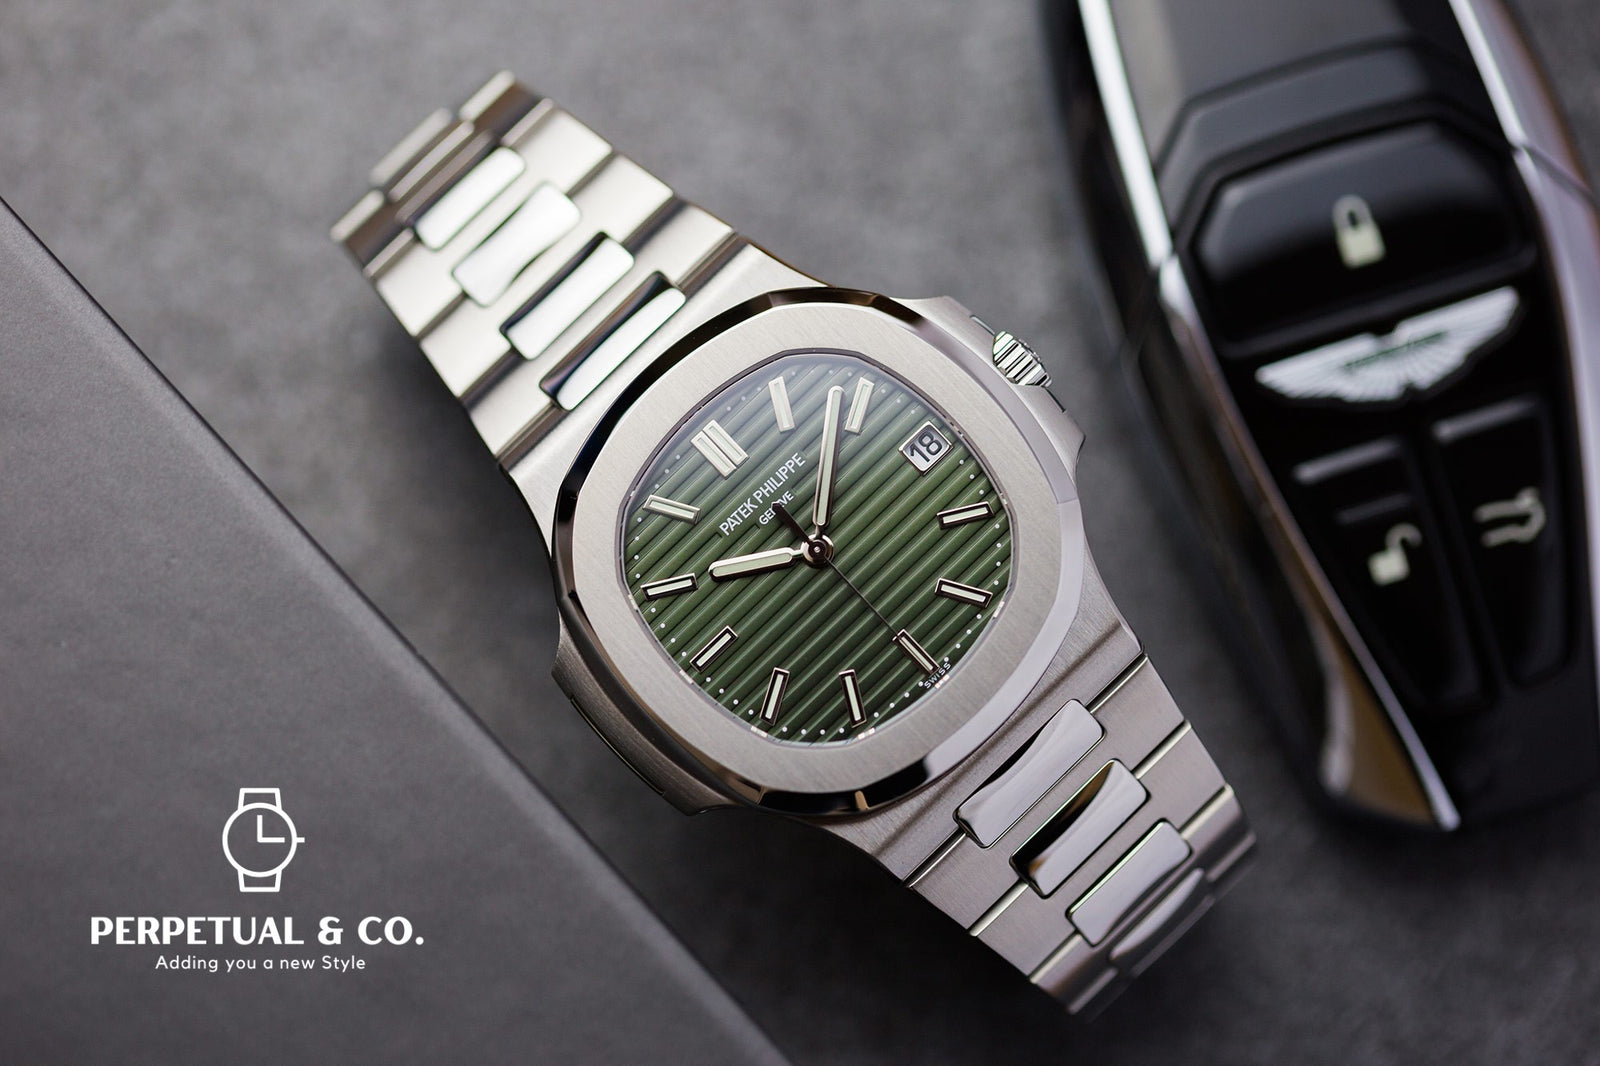 RUBBER STRAP FOR PATEK PHILIPPE NAUTILUS - OLIVE GREEN